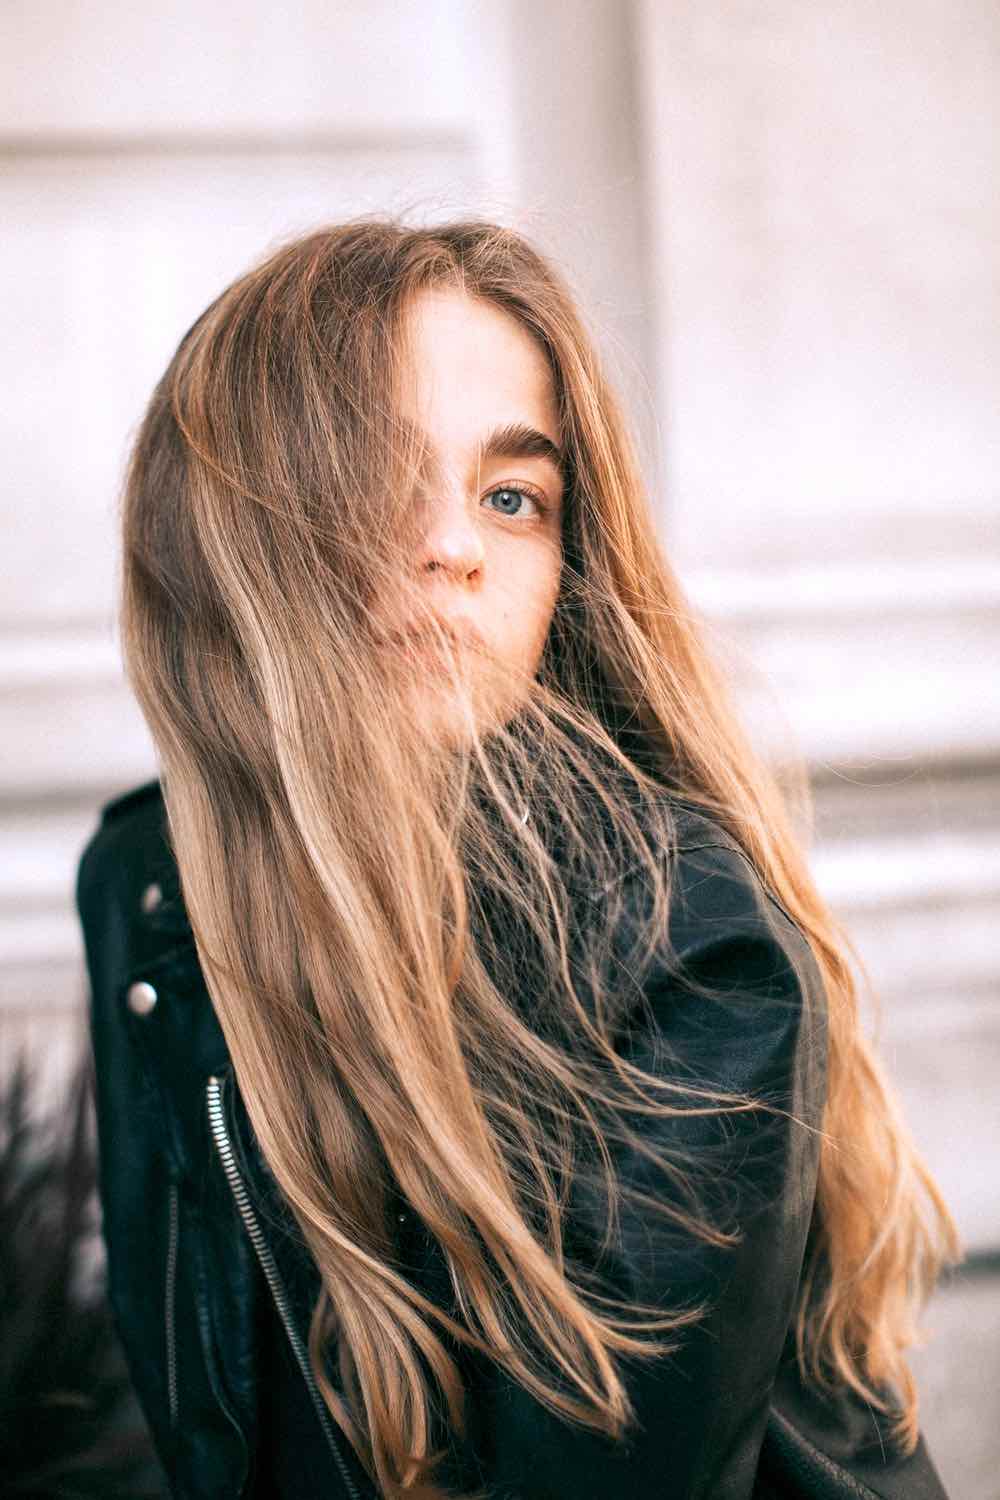 Focus Photography of Woman | What Is Balayage Hair? 9 Things You Need To Know Before You Try This Hair Color